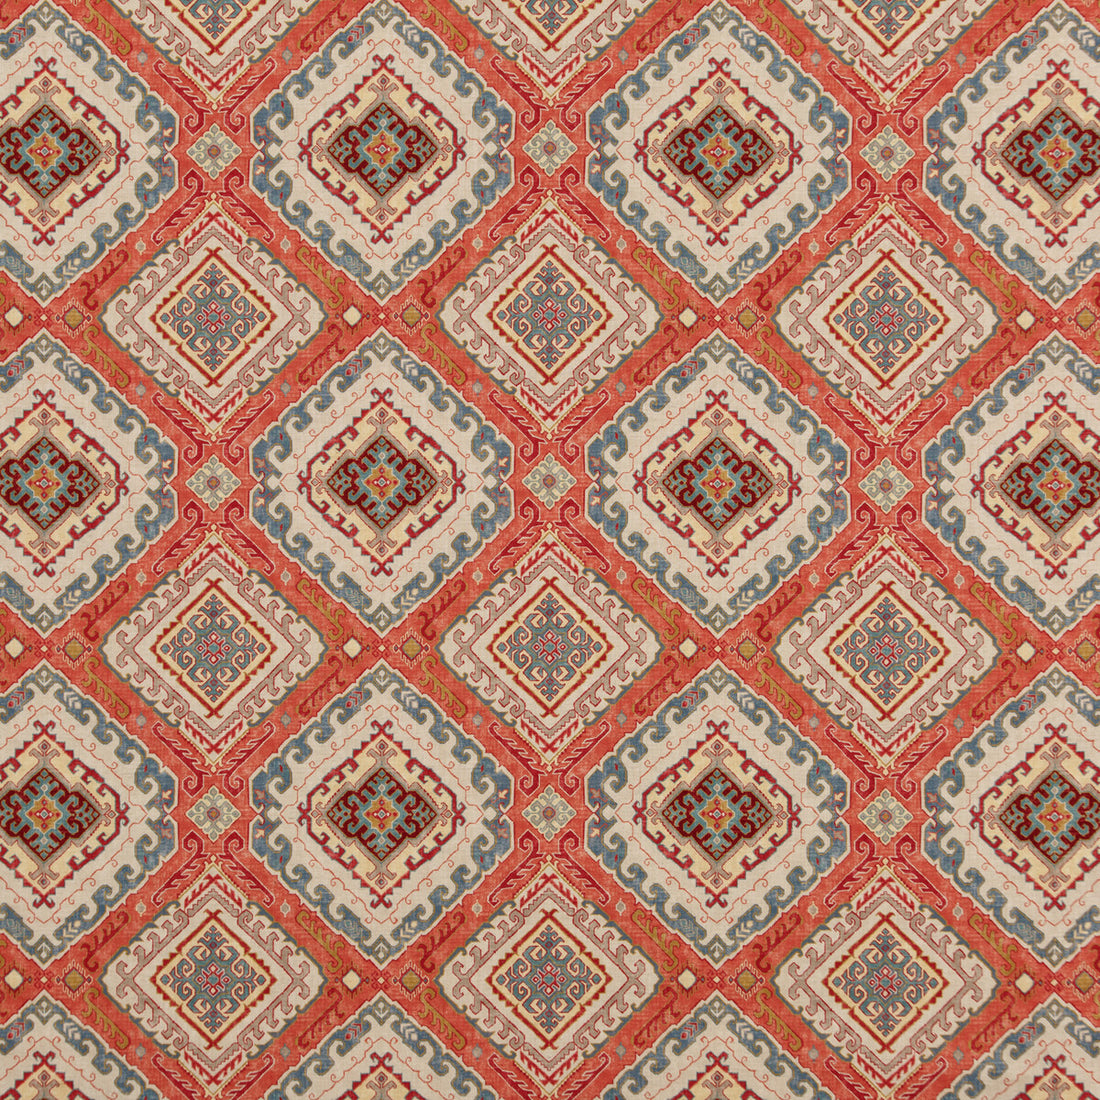 Rozel fabric in spice color - pattern PP50432.4.0 - by Baker Lifestyle in the Carnival collection